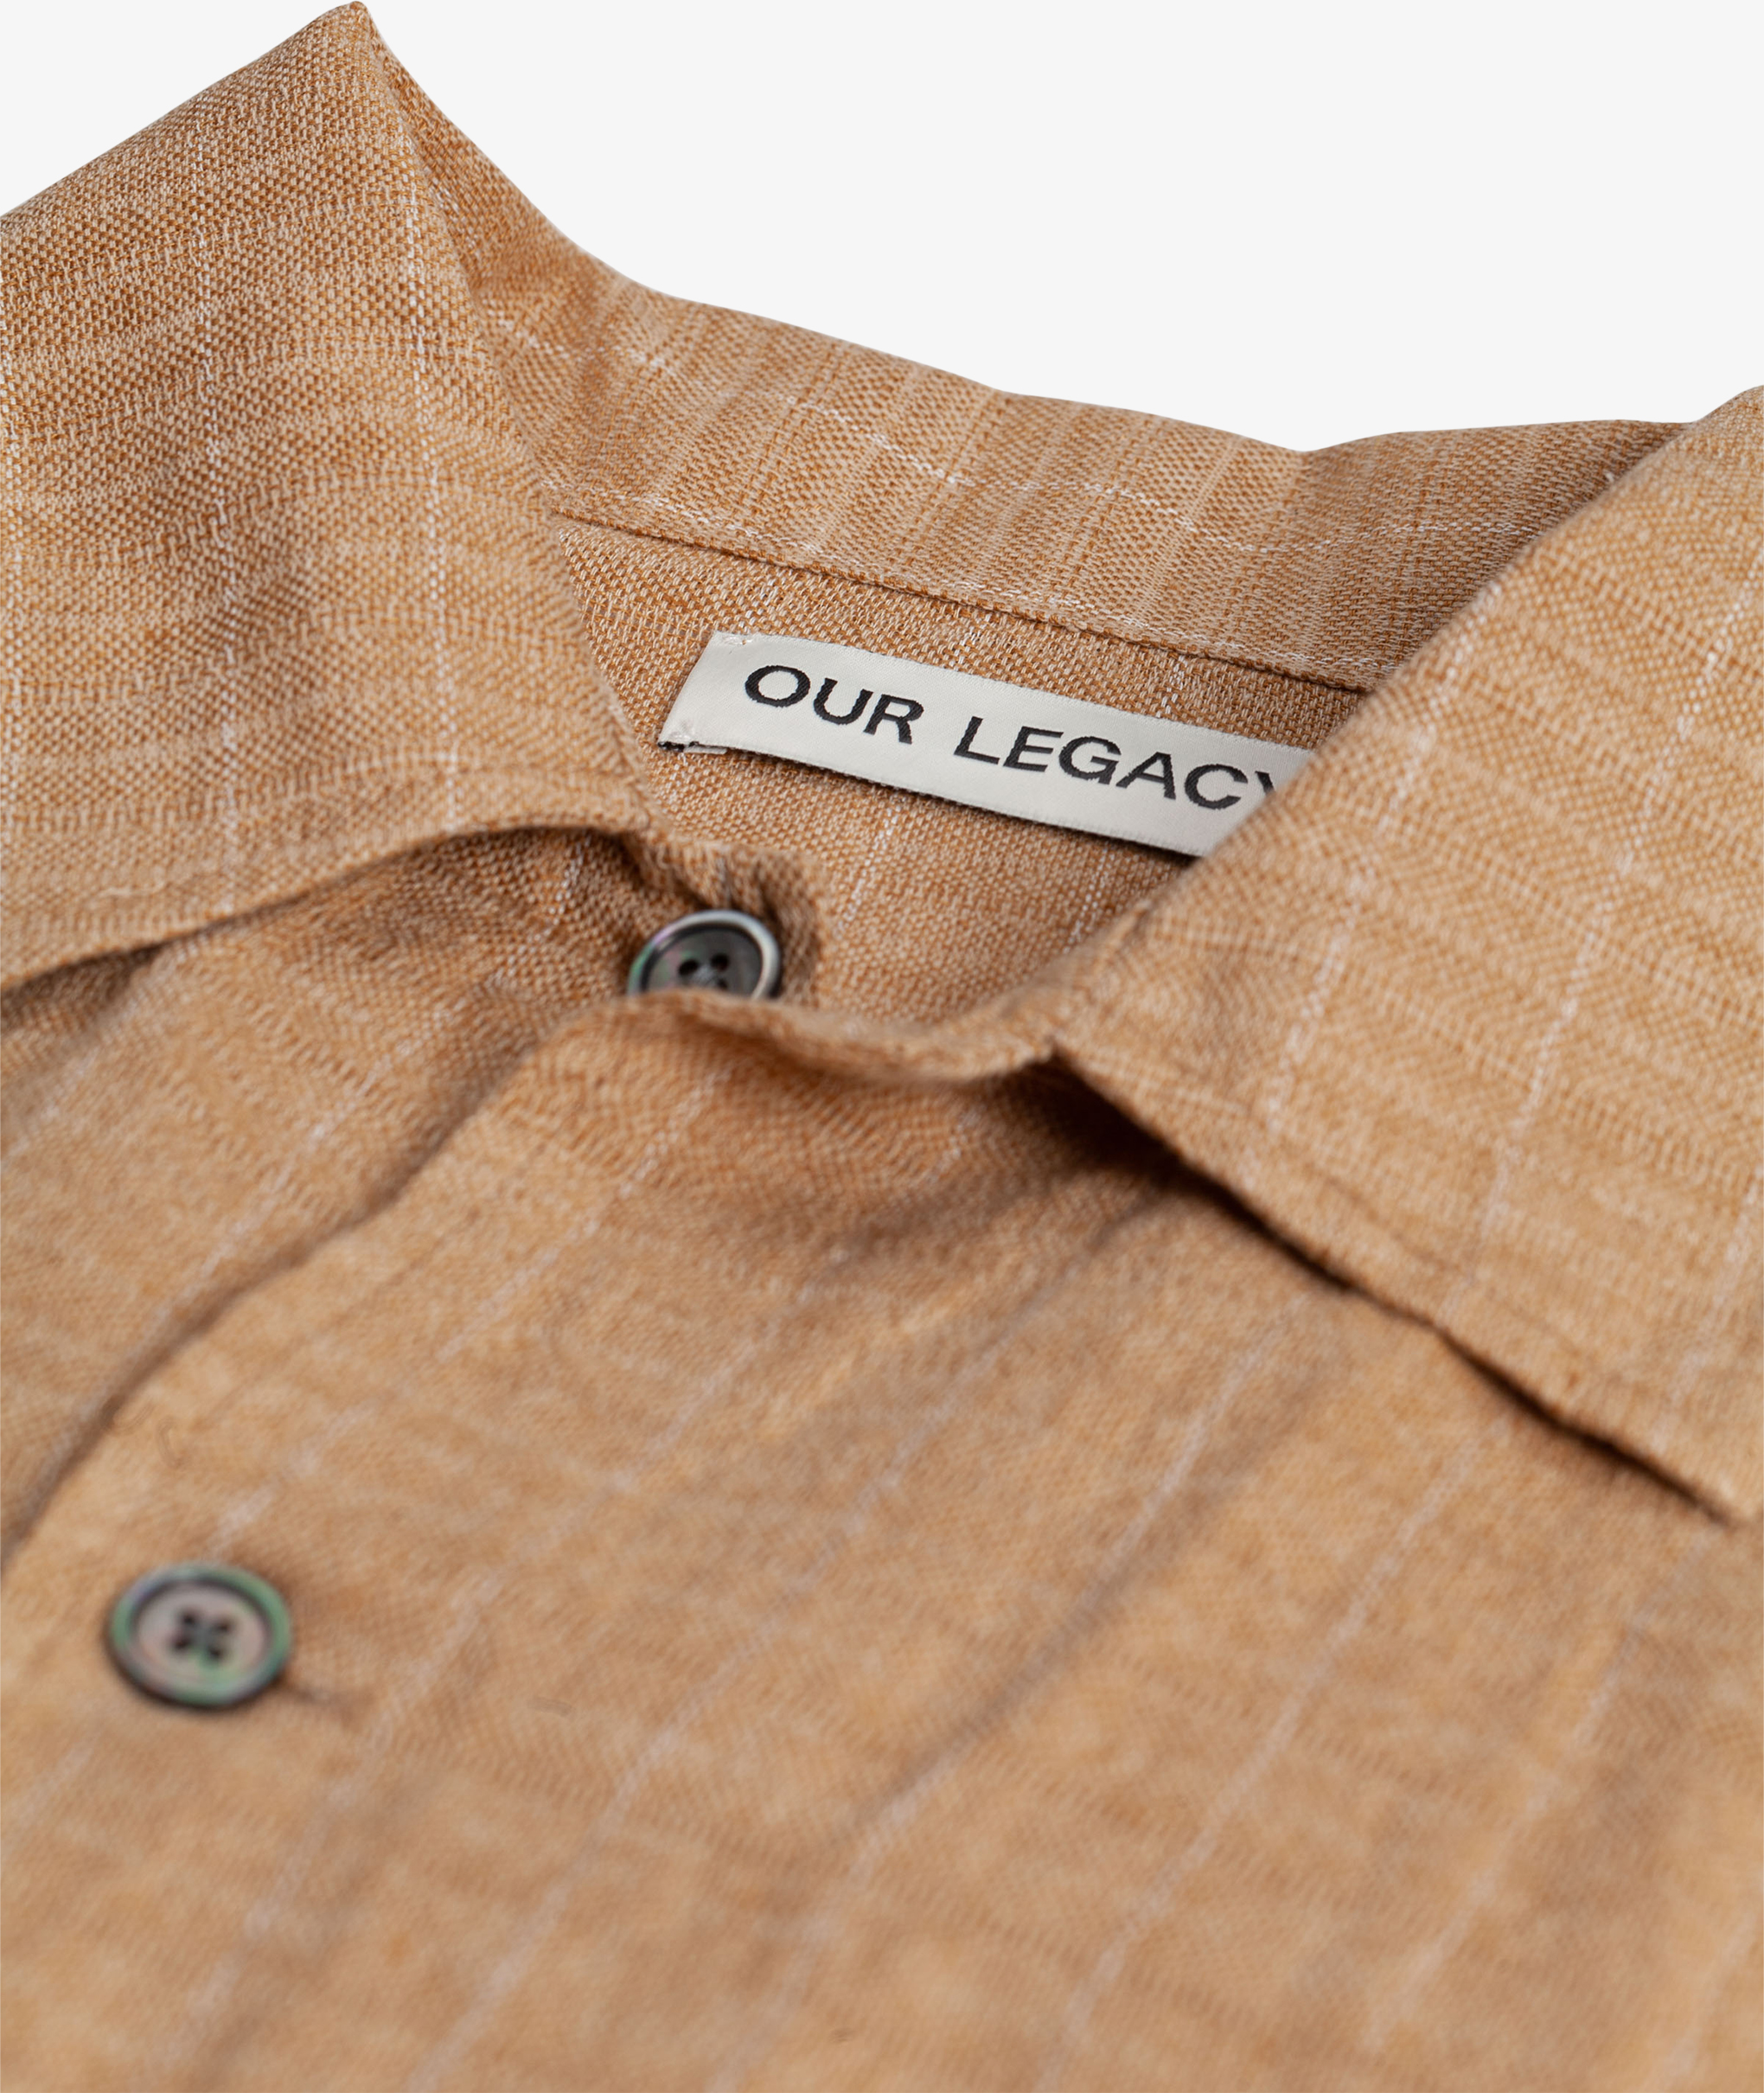 Norse Store | Shipping Worldwide - Our Legacy ELDER SHIRT 